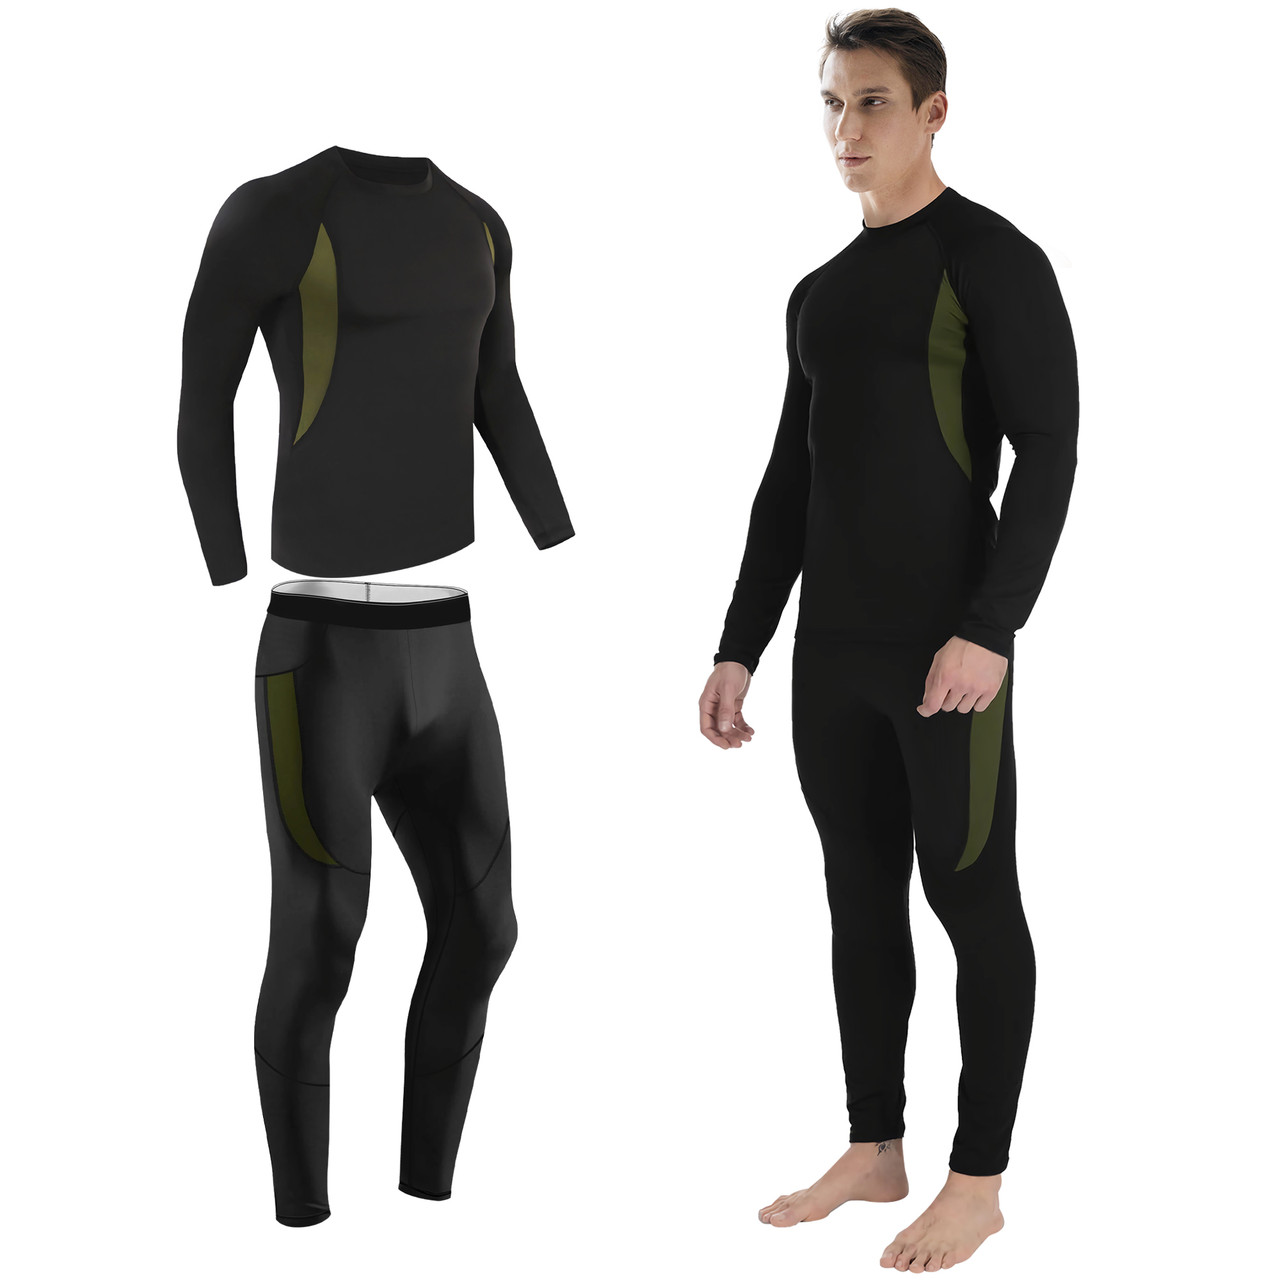 Men's Thermal Underwear Set, Long Sleeve Top and Long Johns with Warm Fleece  Lined, Thermal Base